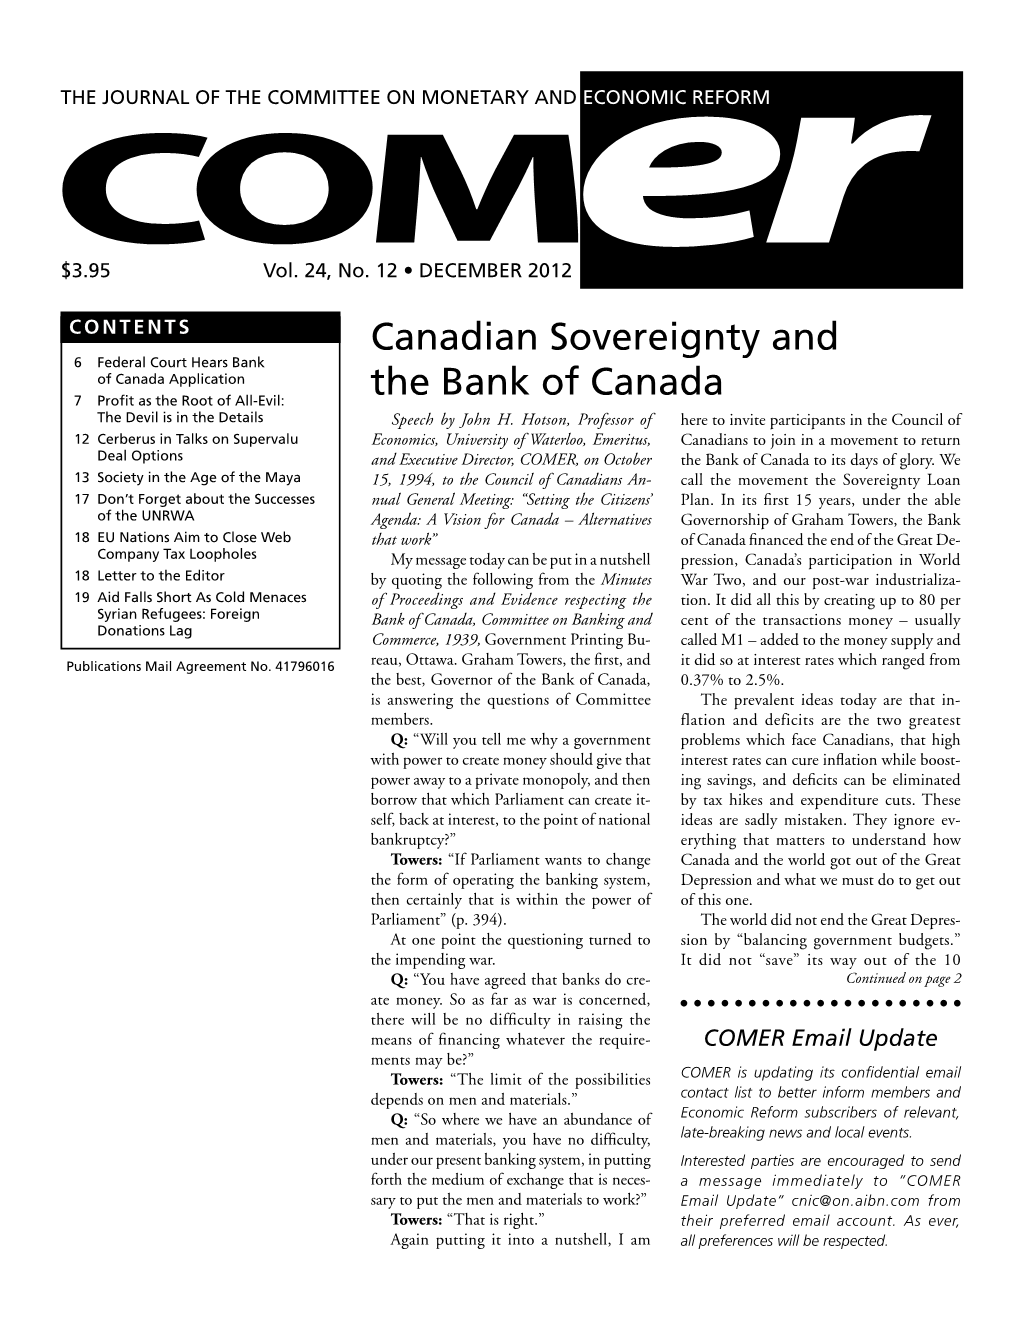 Canadian Sovereignty and the Bank of Canada